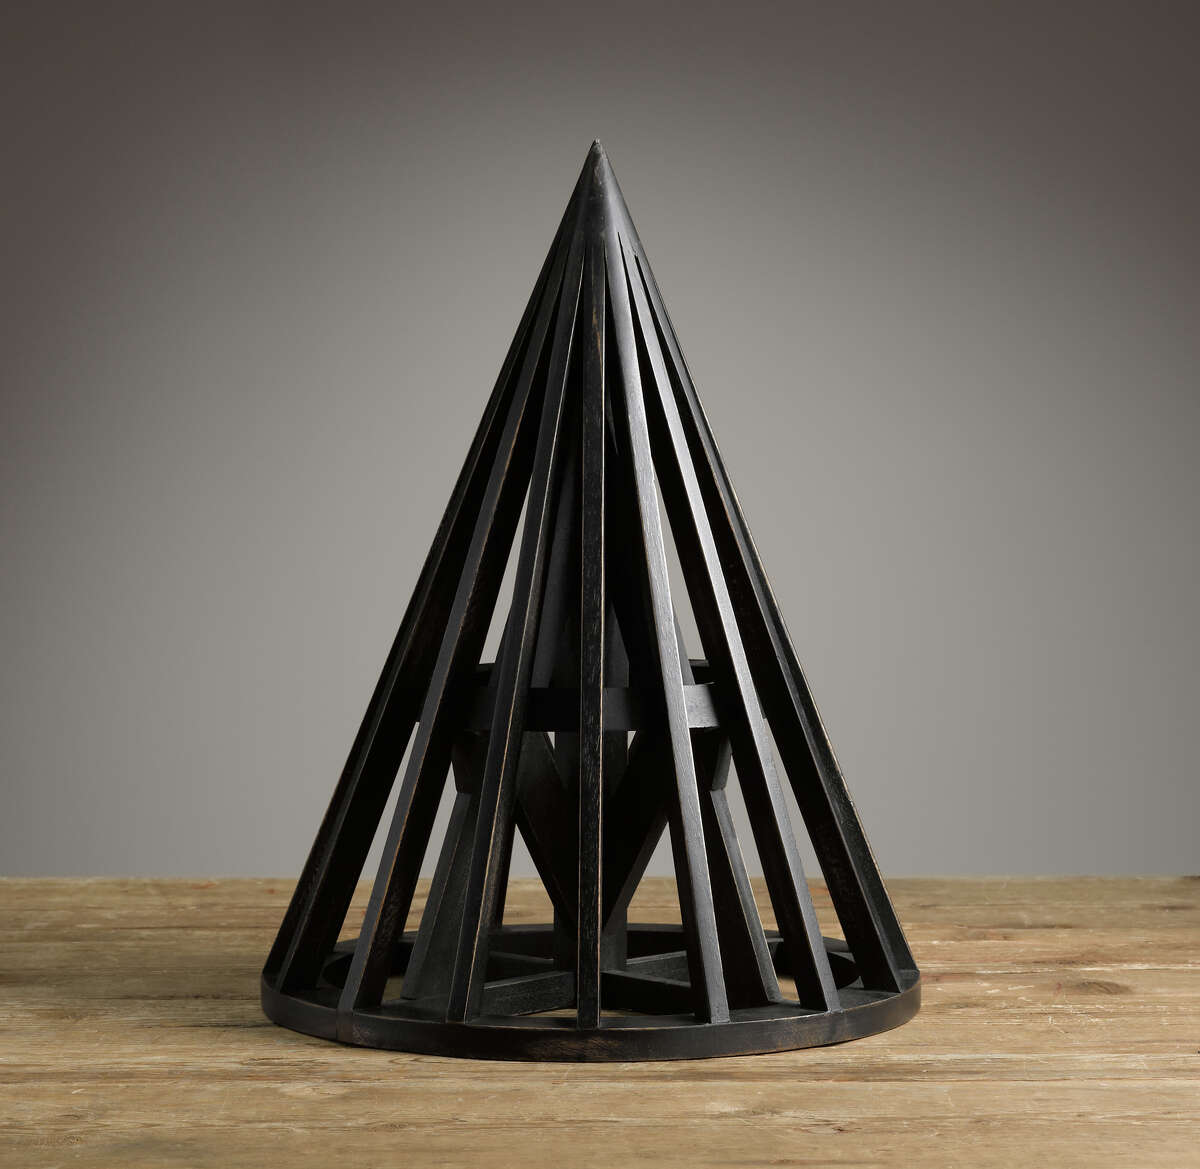 This publicity photo released by Restoration Hardware shows a black Belgian wooden maquette, a scaled replicas of a model used by an architect to study form, structure and proportion. Geometric shapes are strong decor elements for Fall 2013 (www.restorationhardware.com). (AP Photo/Restoration Hardware) ORG XMIT: NYLS207